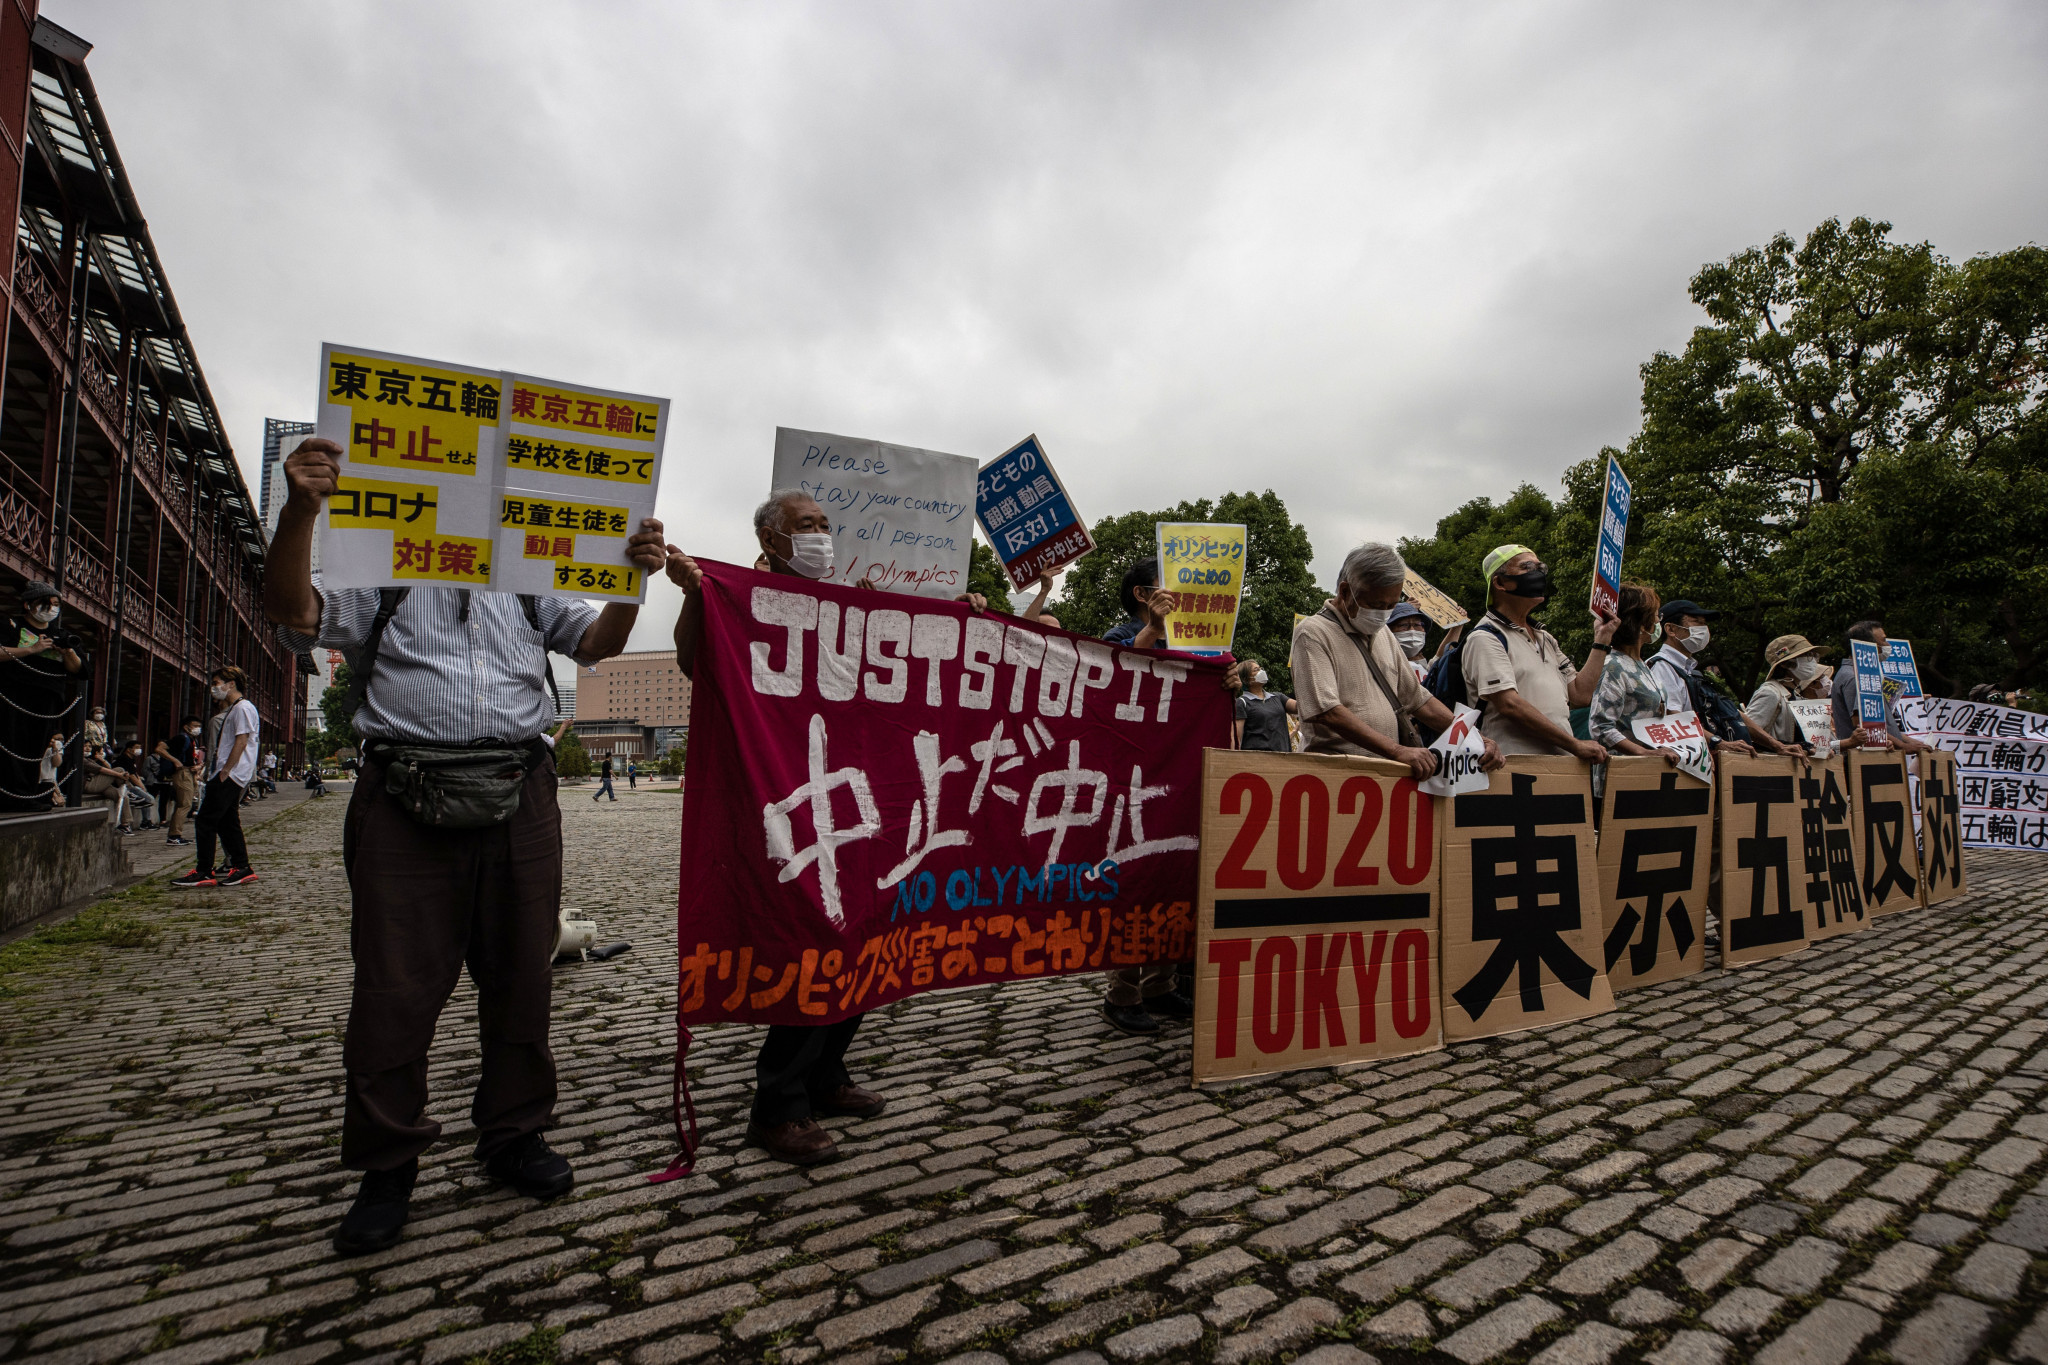 Protests are continuing in Japan against the staging of the Olympics due to COVID-19 concerns ©Getty Images